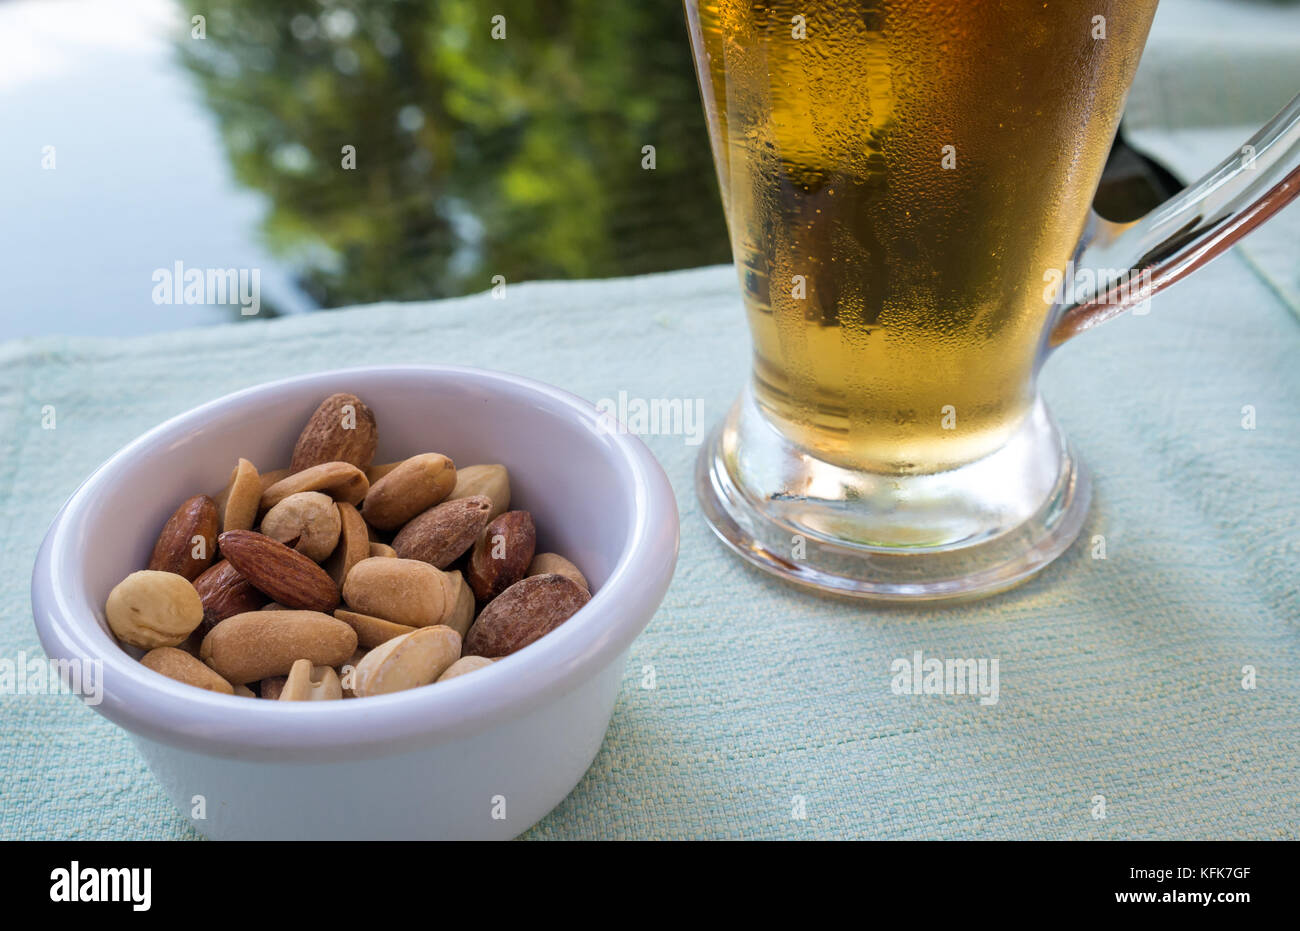 Close up of cold beer glass mug and mixed nuts in small dish on lunch table setting with blurred background, Jordan, Middle East Stock Photo